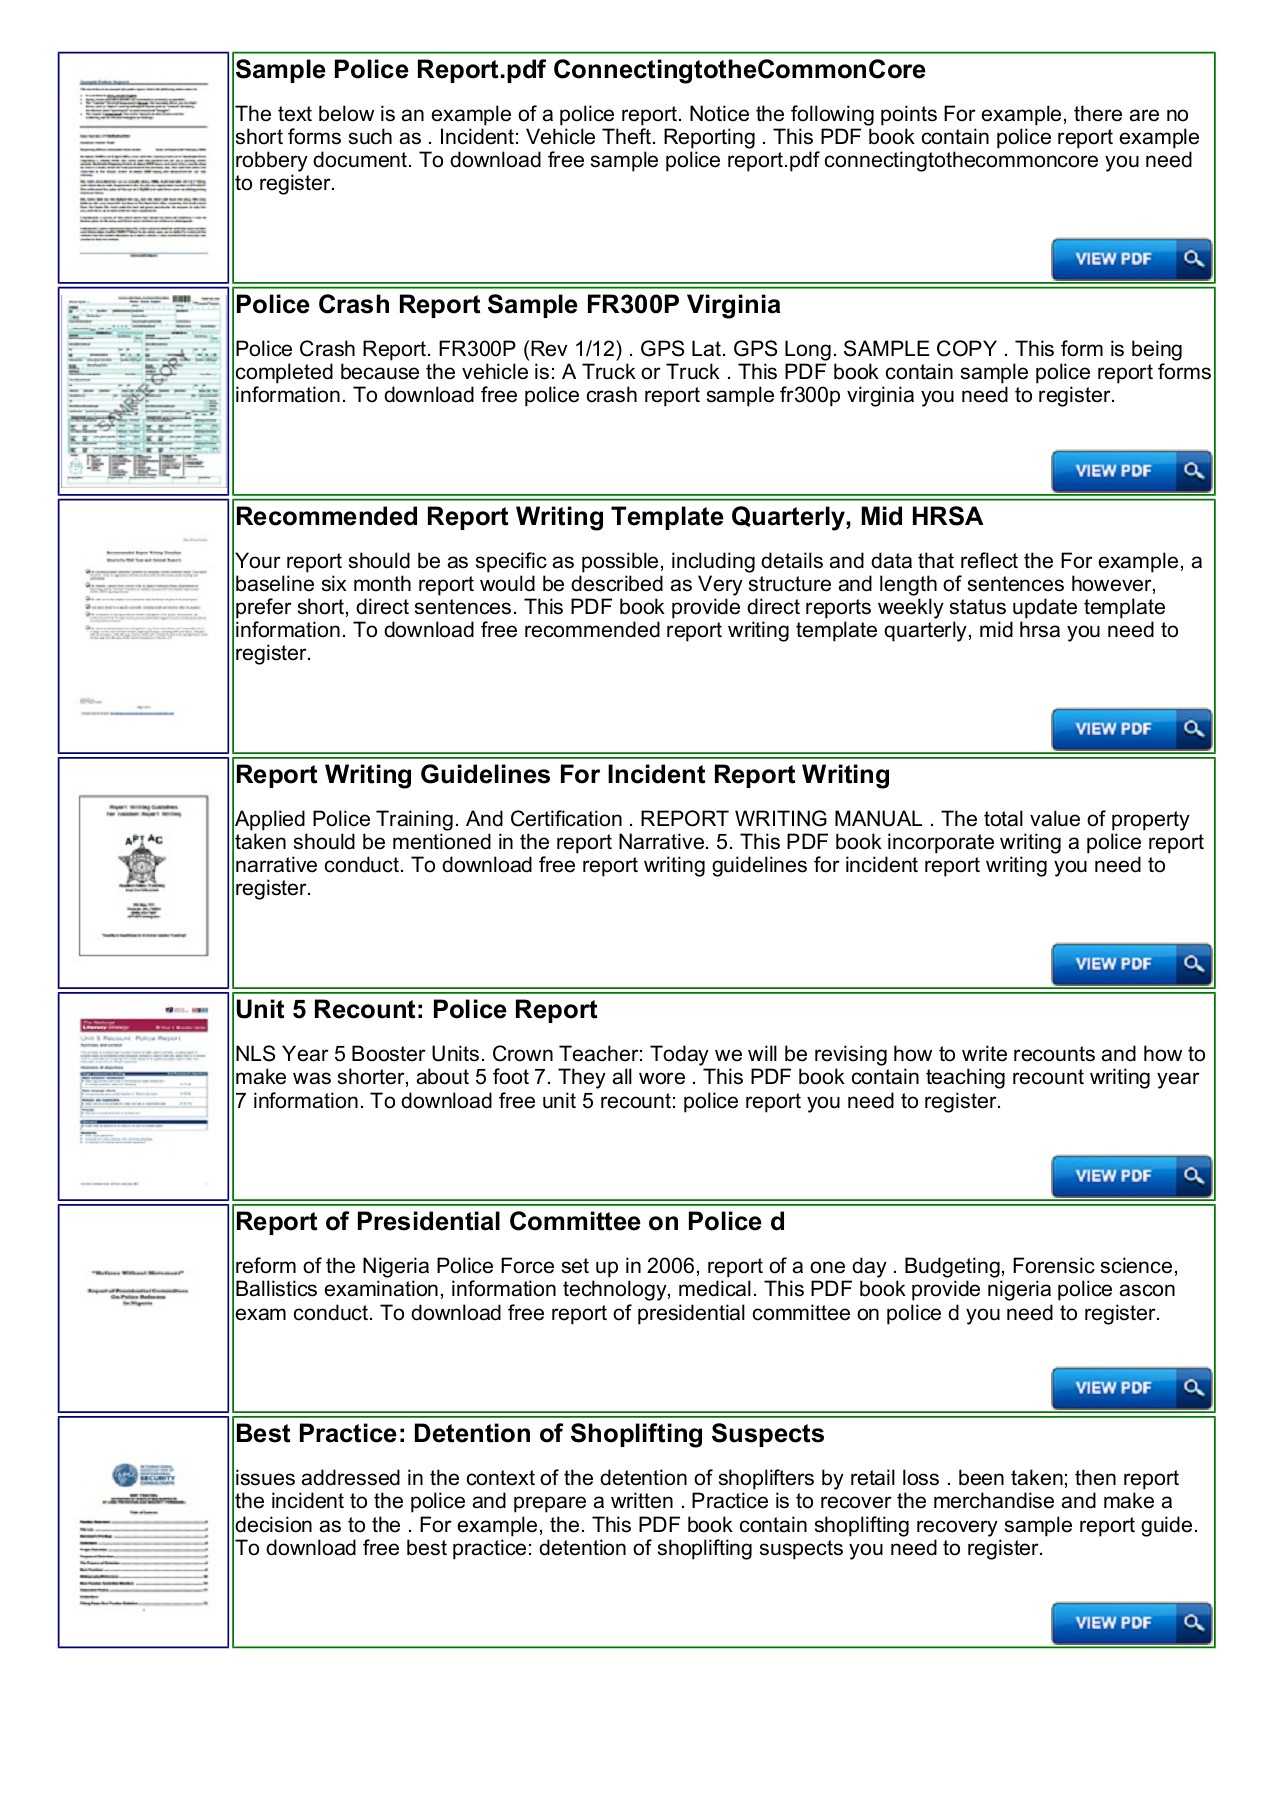 Police Shoplifting Report Writing Template Sample For Template On How To Write A Report